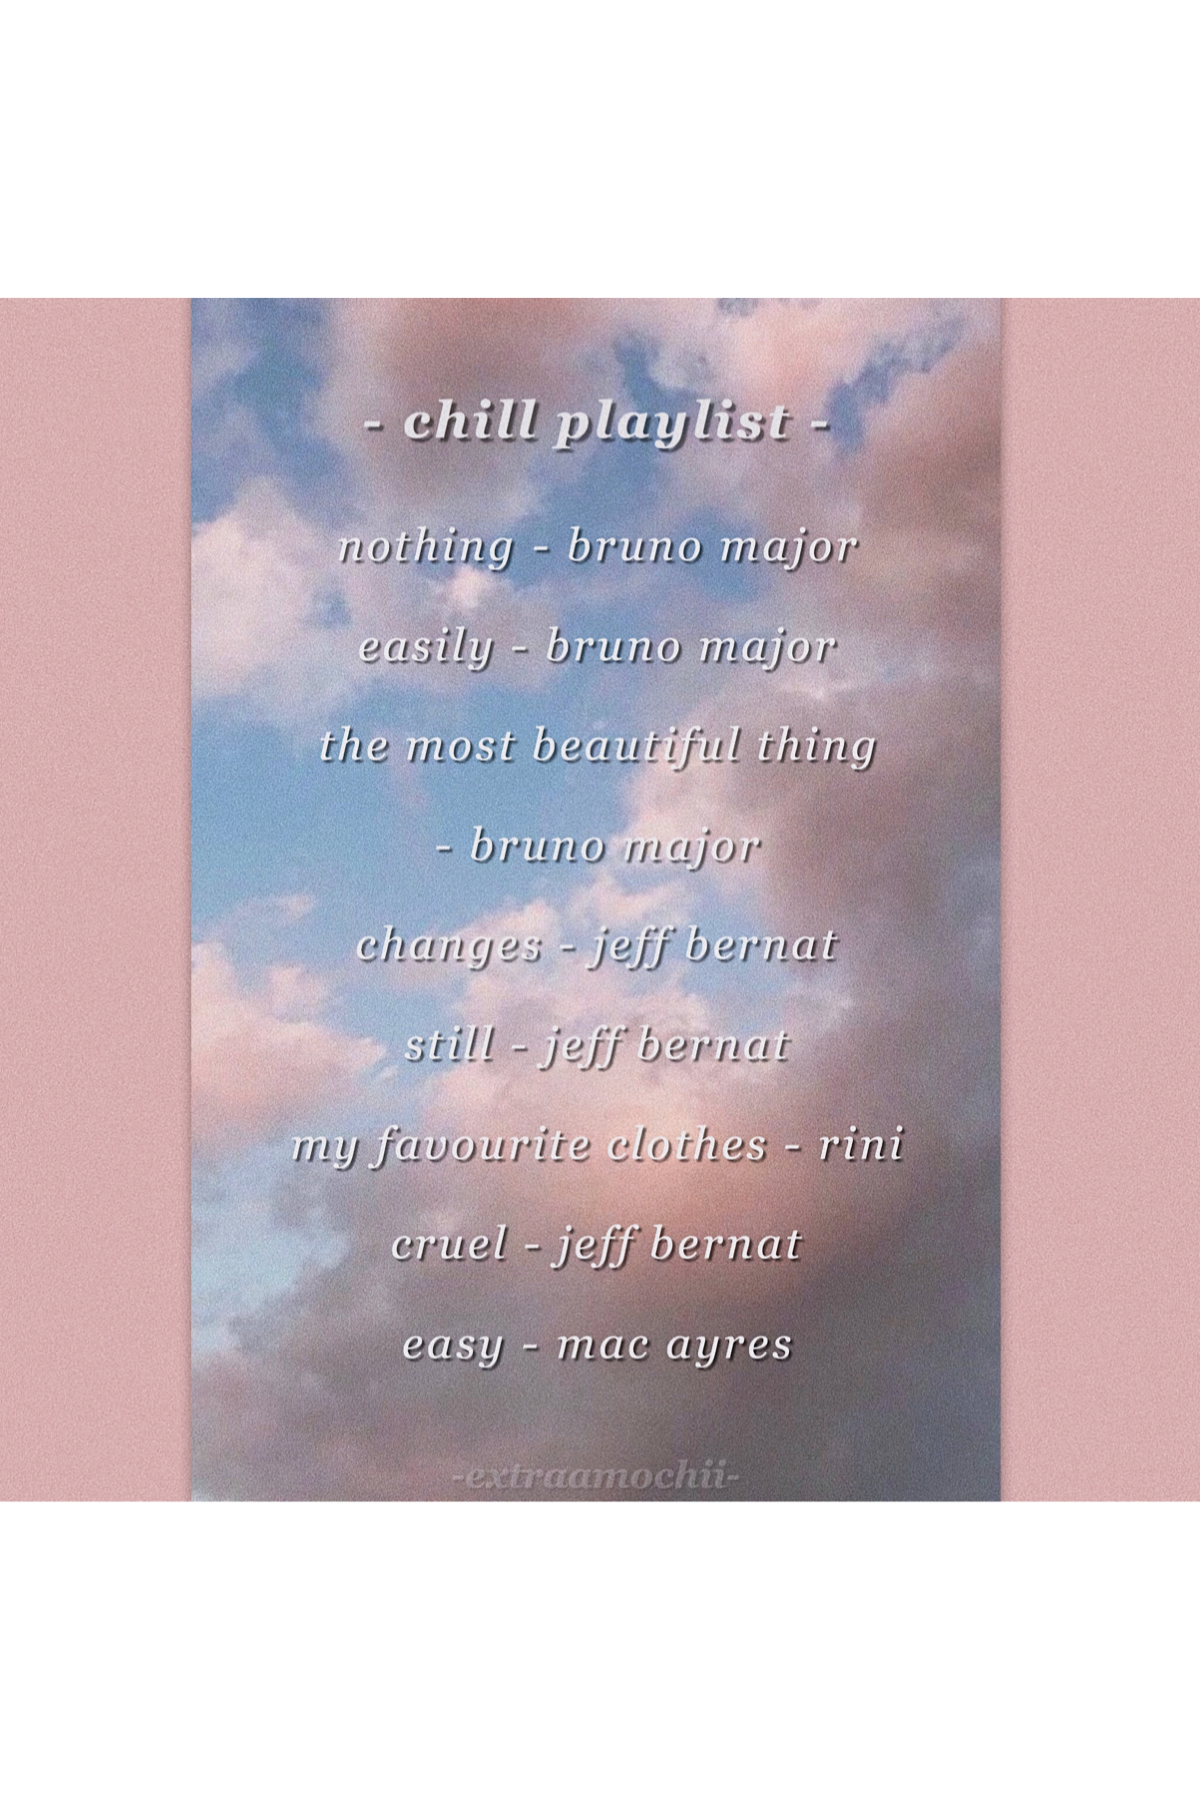 tap the egg~🥚

🐣
ùwú

this is my non kpop playlist, let me know if you want moreee
listen for a calm, relaxing, and chill day~

- sending love -